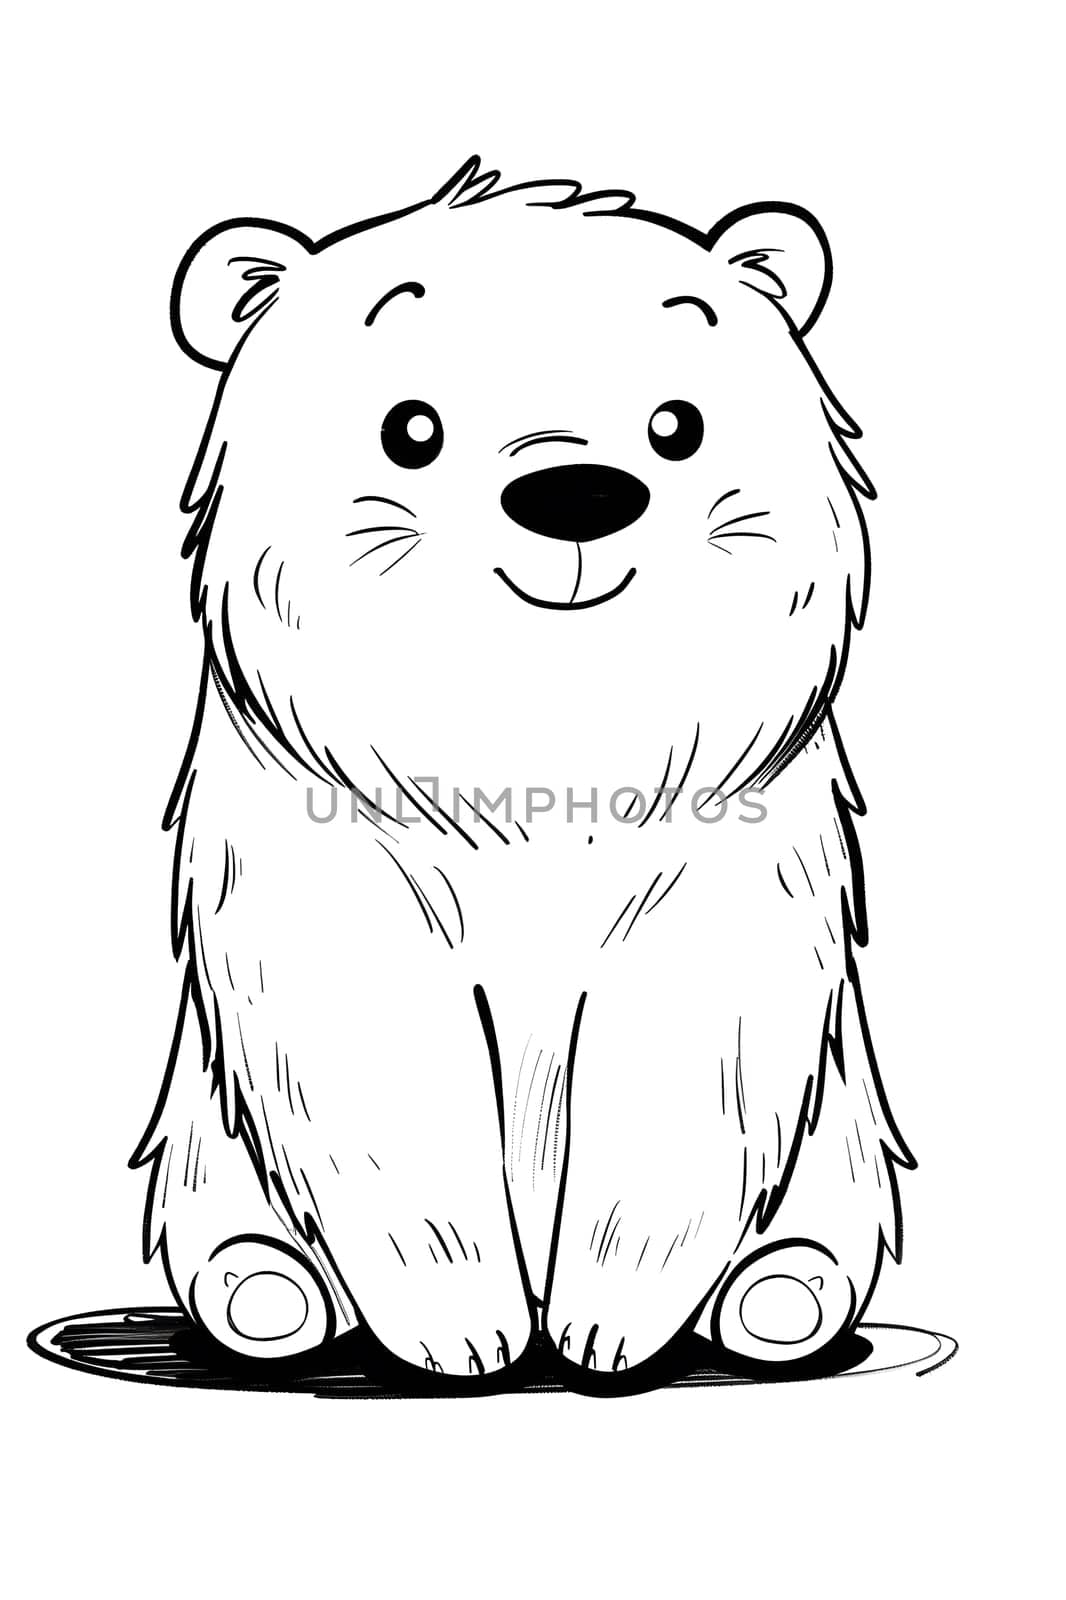 A cartoonstyle black and white drawing of a happy polar bear sitting down, with a big smile on its face. The details of its jaw, liquid font, and gesturing point to its carnivore organism